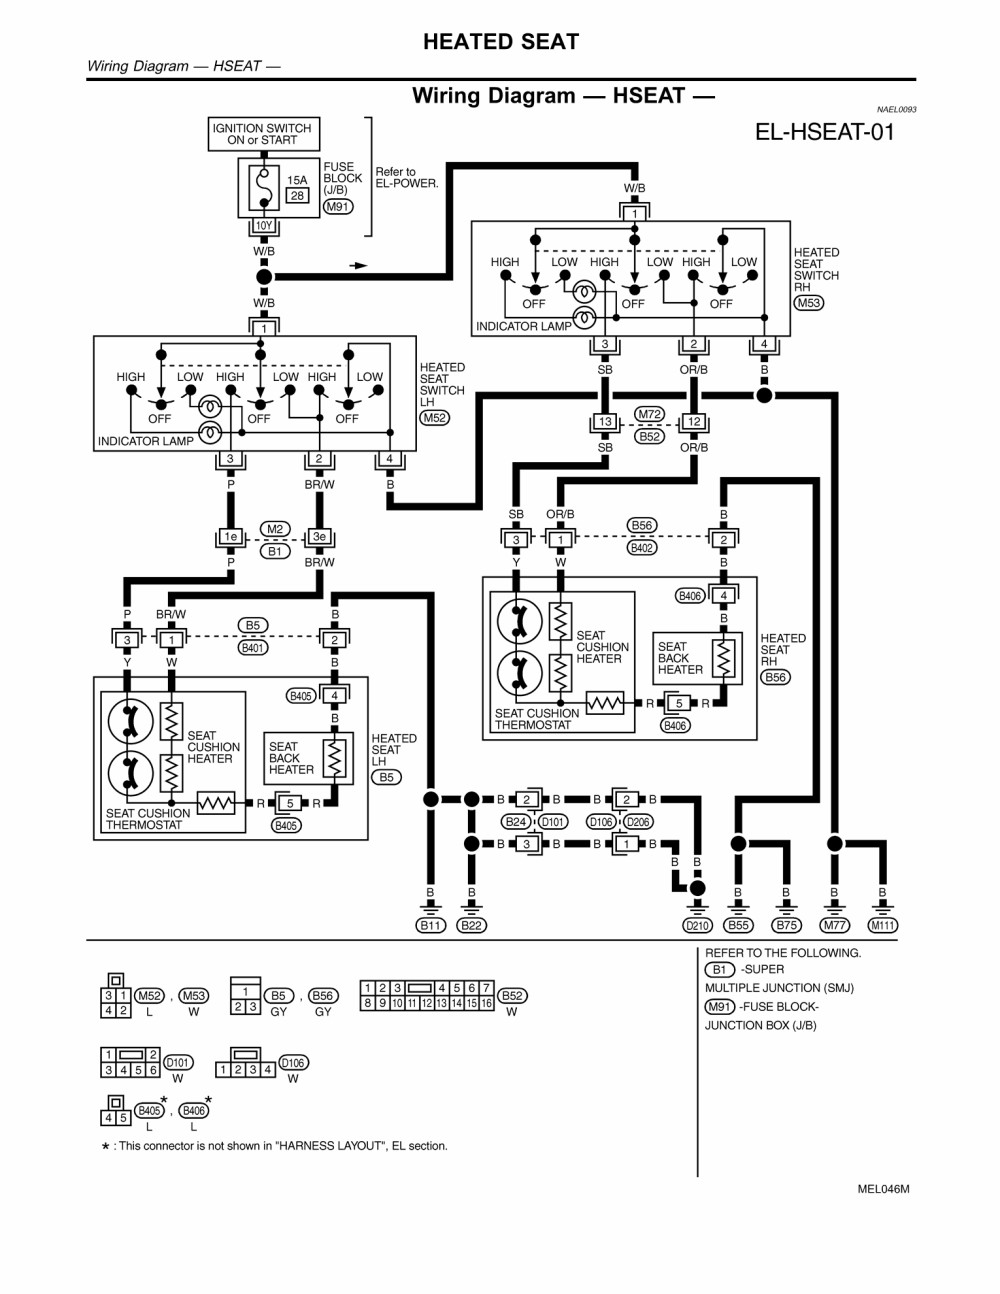 Nissan Maxima Radio Wiring Diagram And 2003 Deltagenerali Me Best In